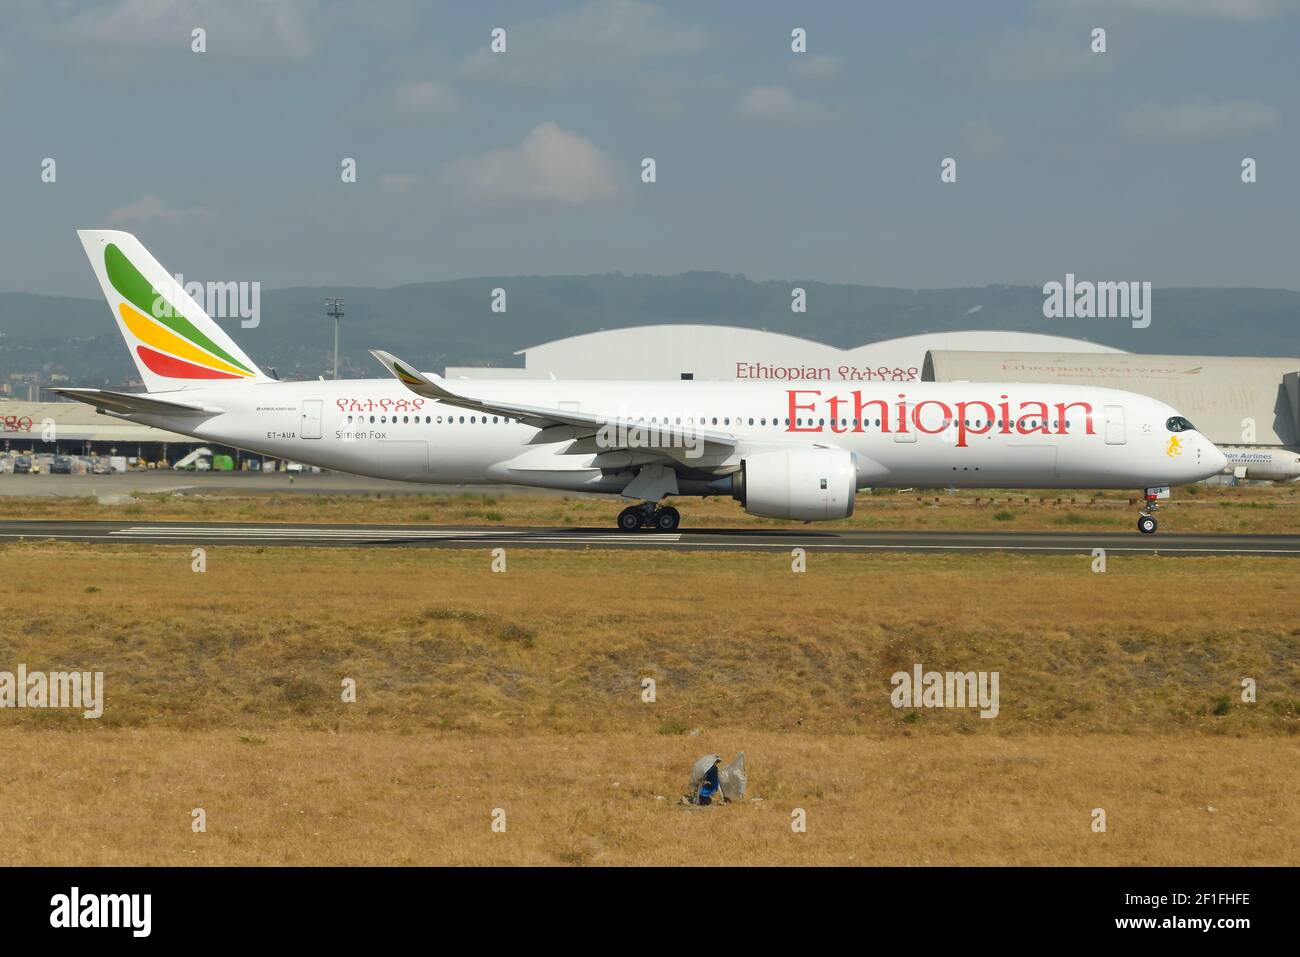 Ethiopian Airlines Airbus A350 aircraft at Addis Ababa Bole International Airport in Ethiopia, the hub of Ethiopian Air Lines. Airplane A350-900. Stock Photo